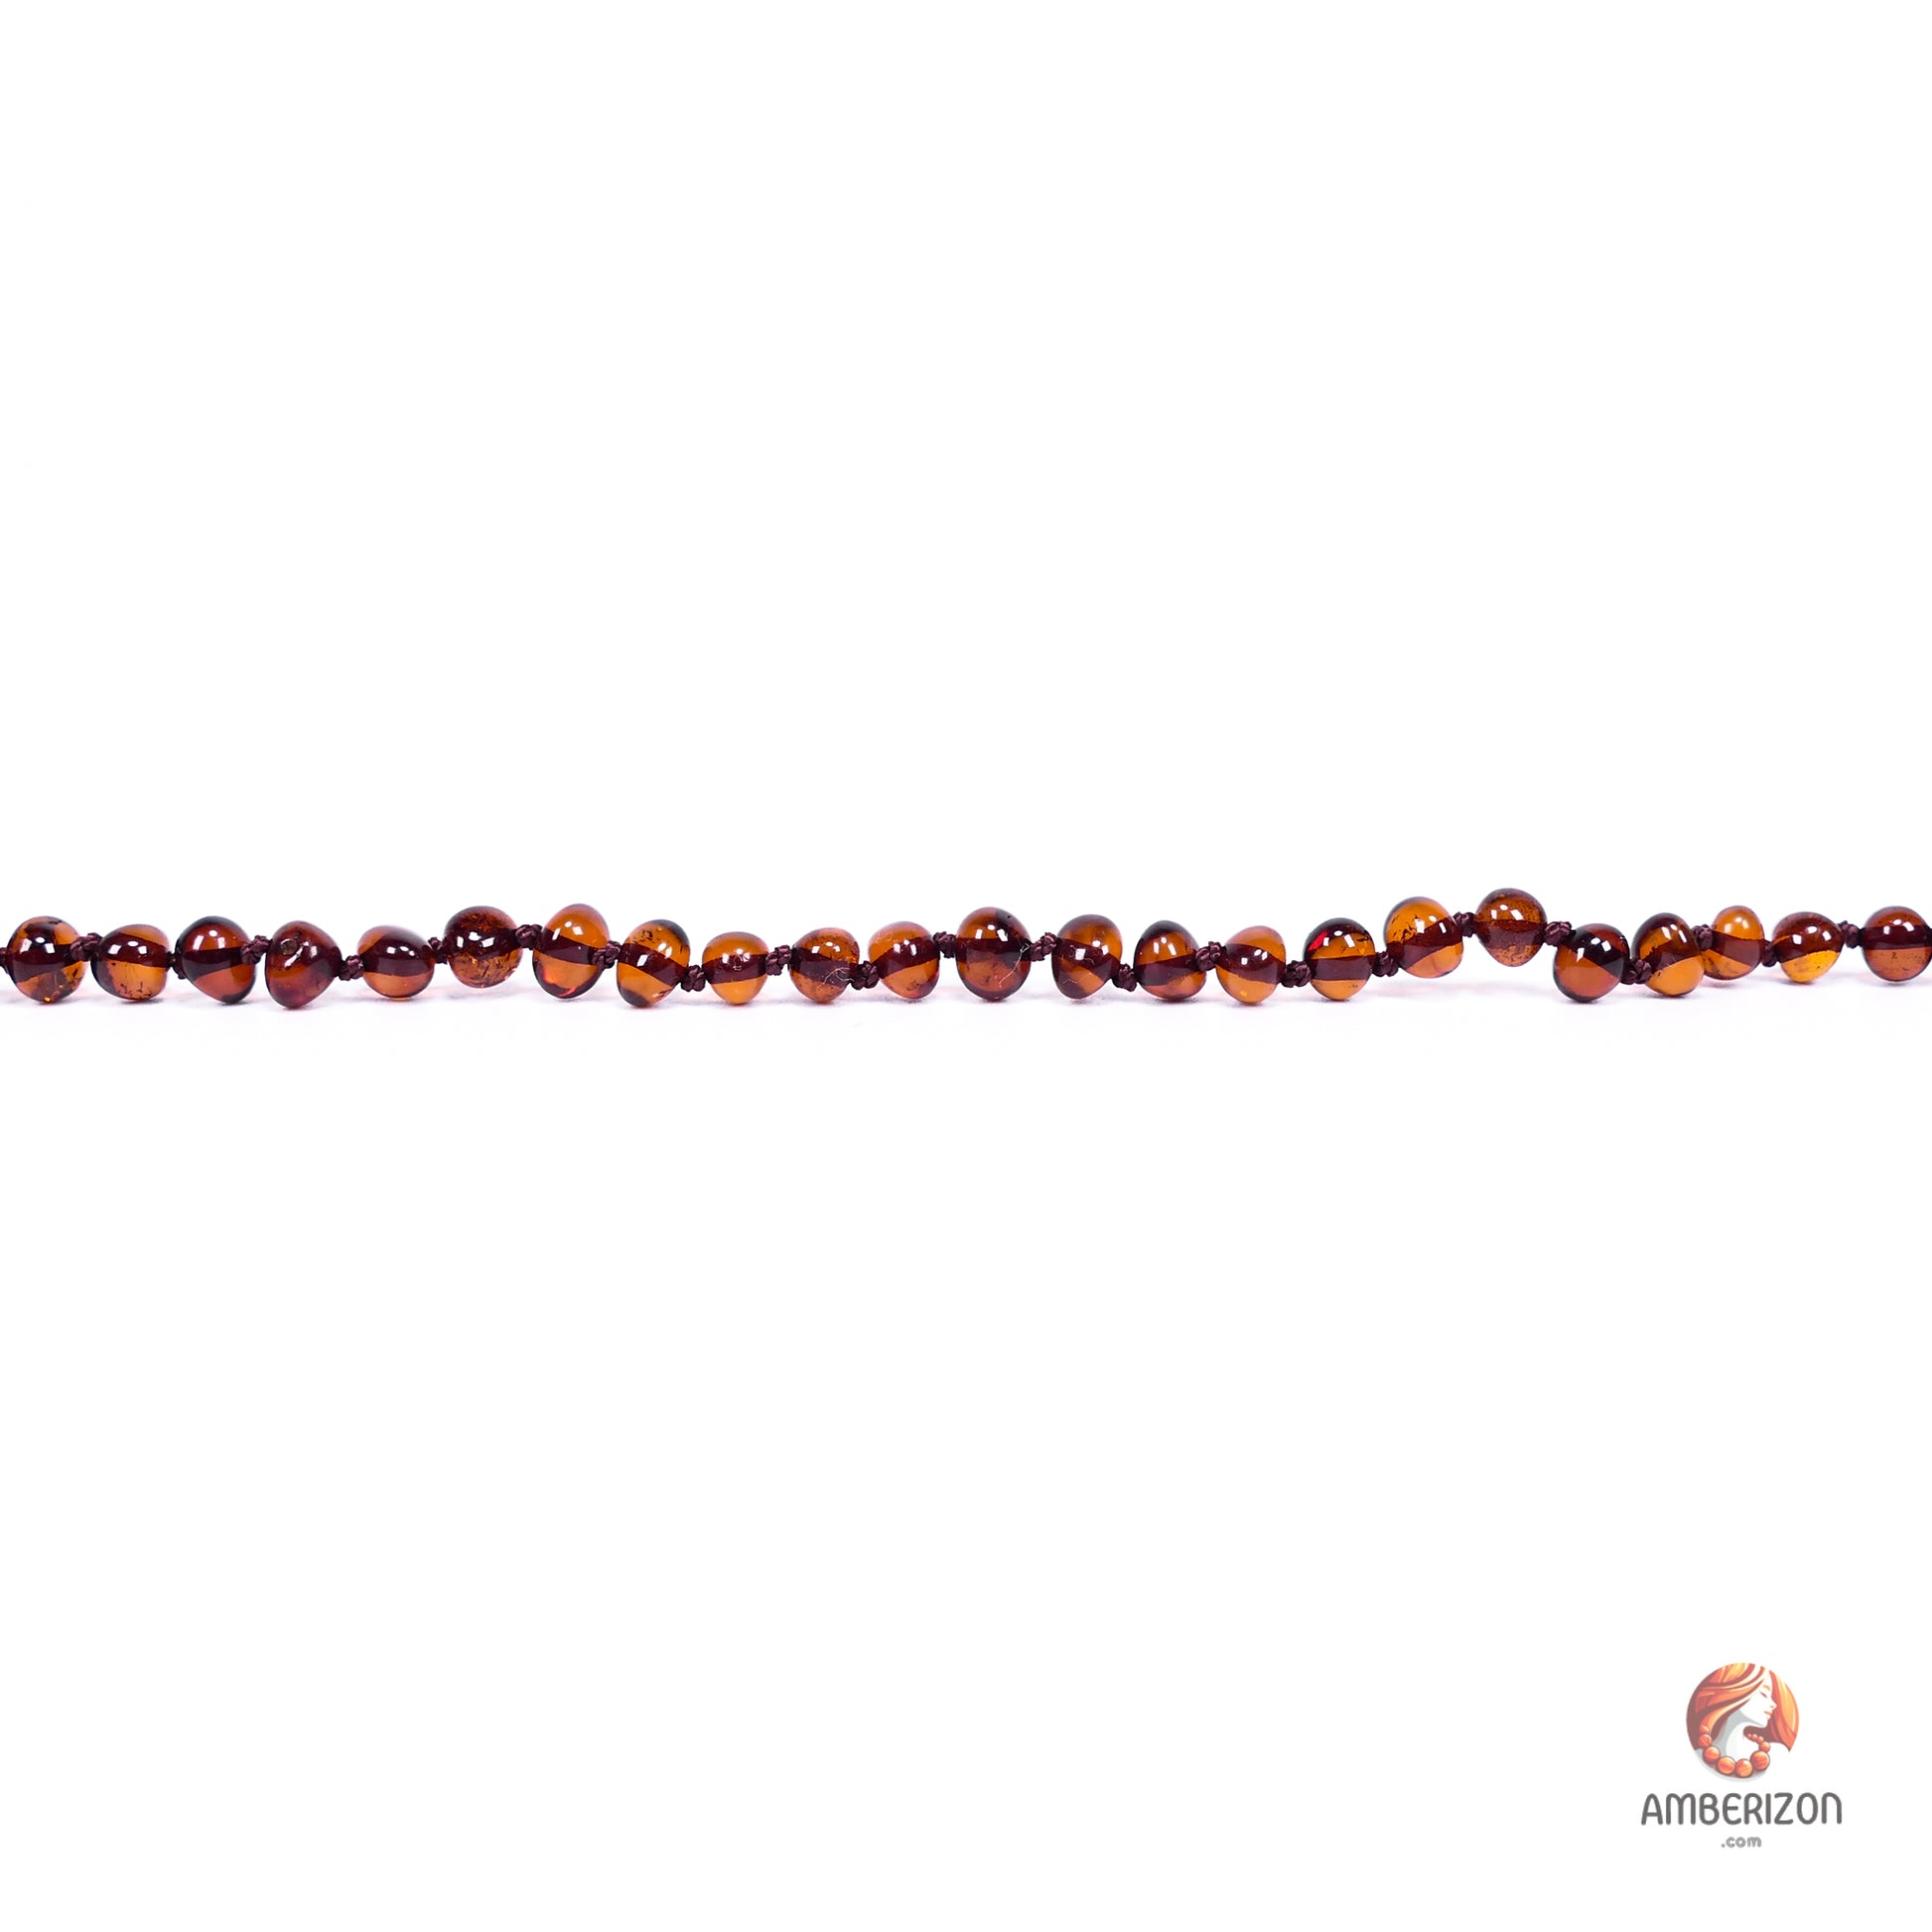 Unisex Baltic Amber Necklace - Certified Cherry Baroque Beads